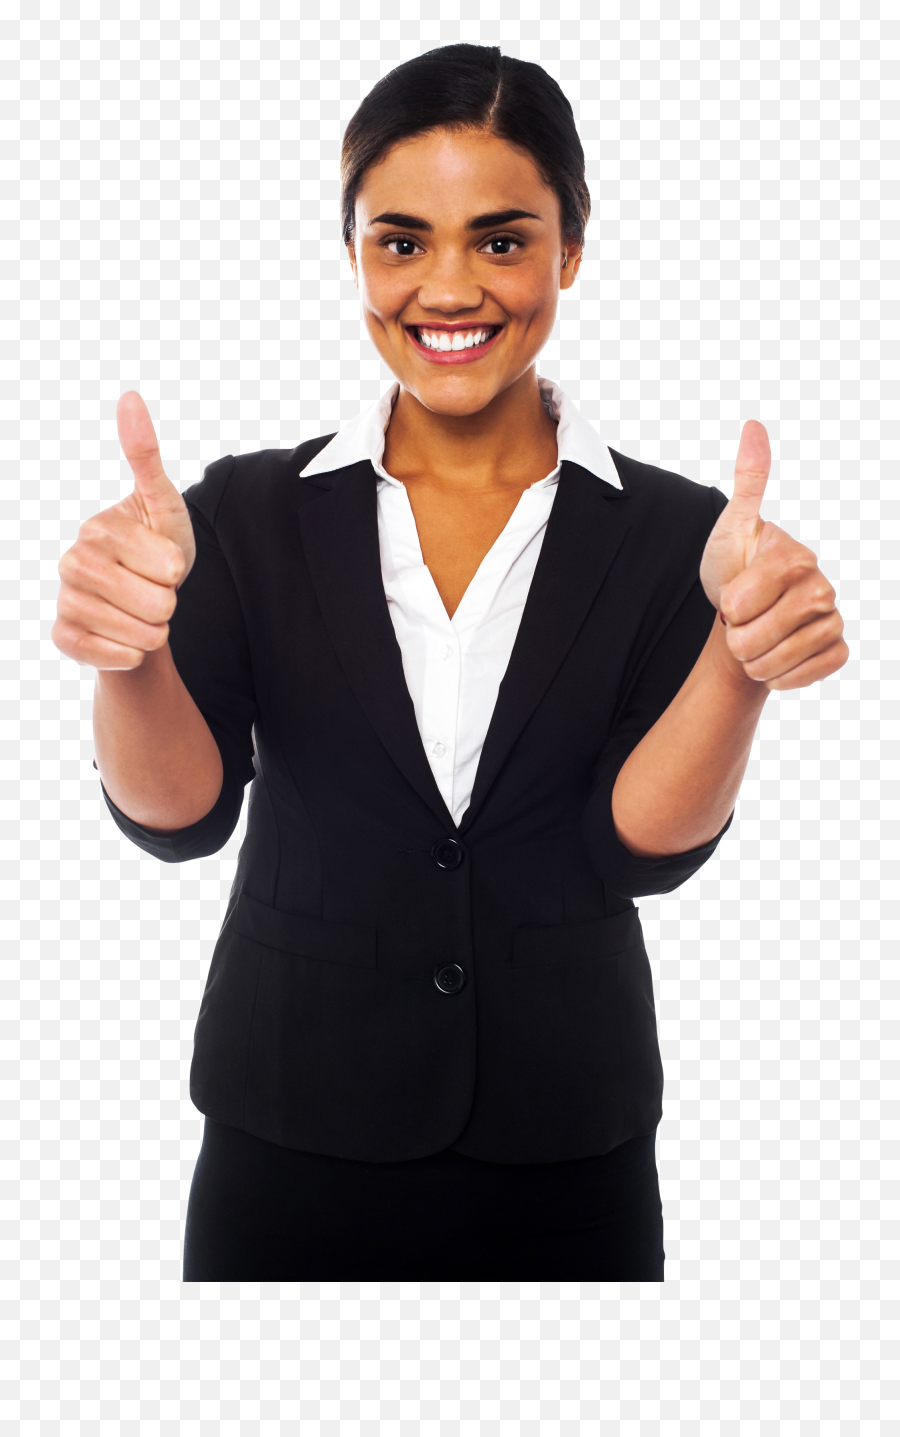 Women Pointing Thumbs Up Png Image - Woman Thumbs Up Png Emoji,Thumbs Up Png